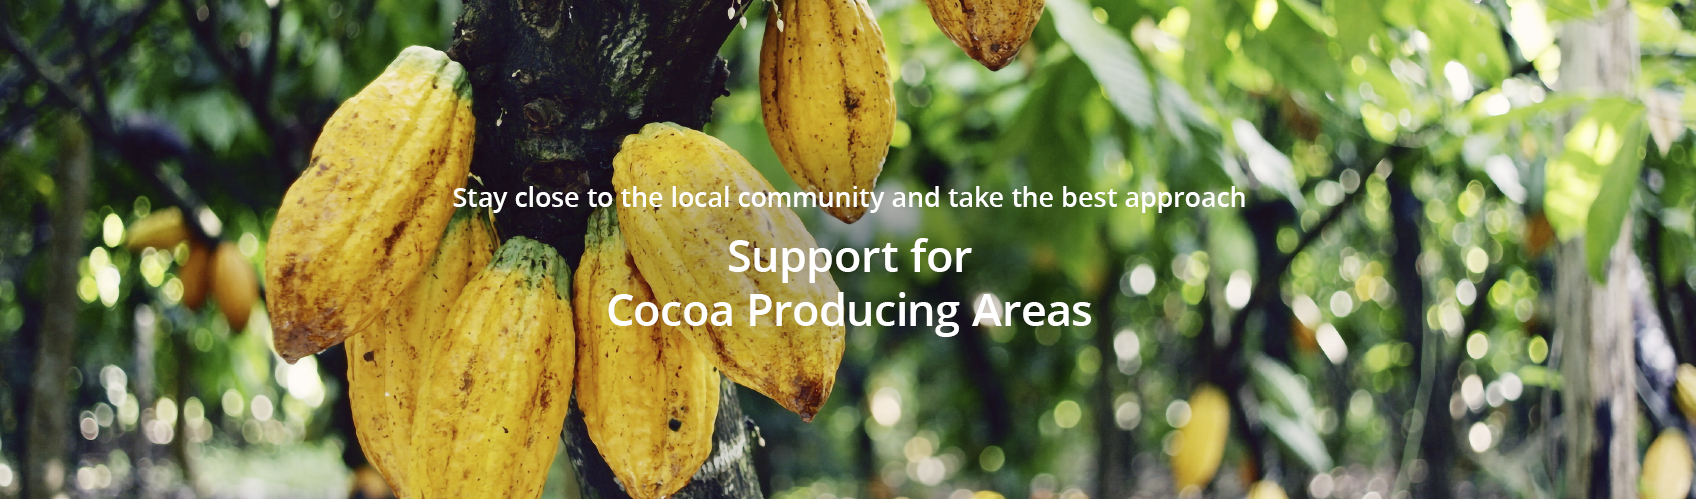 Support for cocoa producing areas Stay close to the local community and take the best approach.